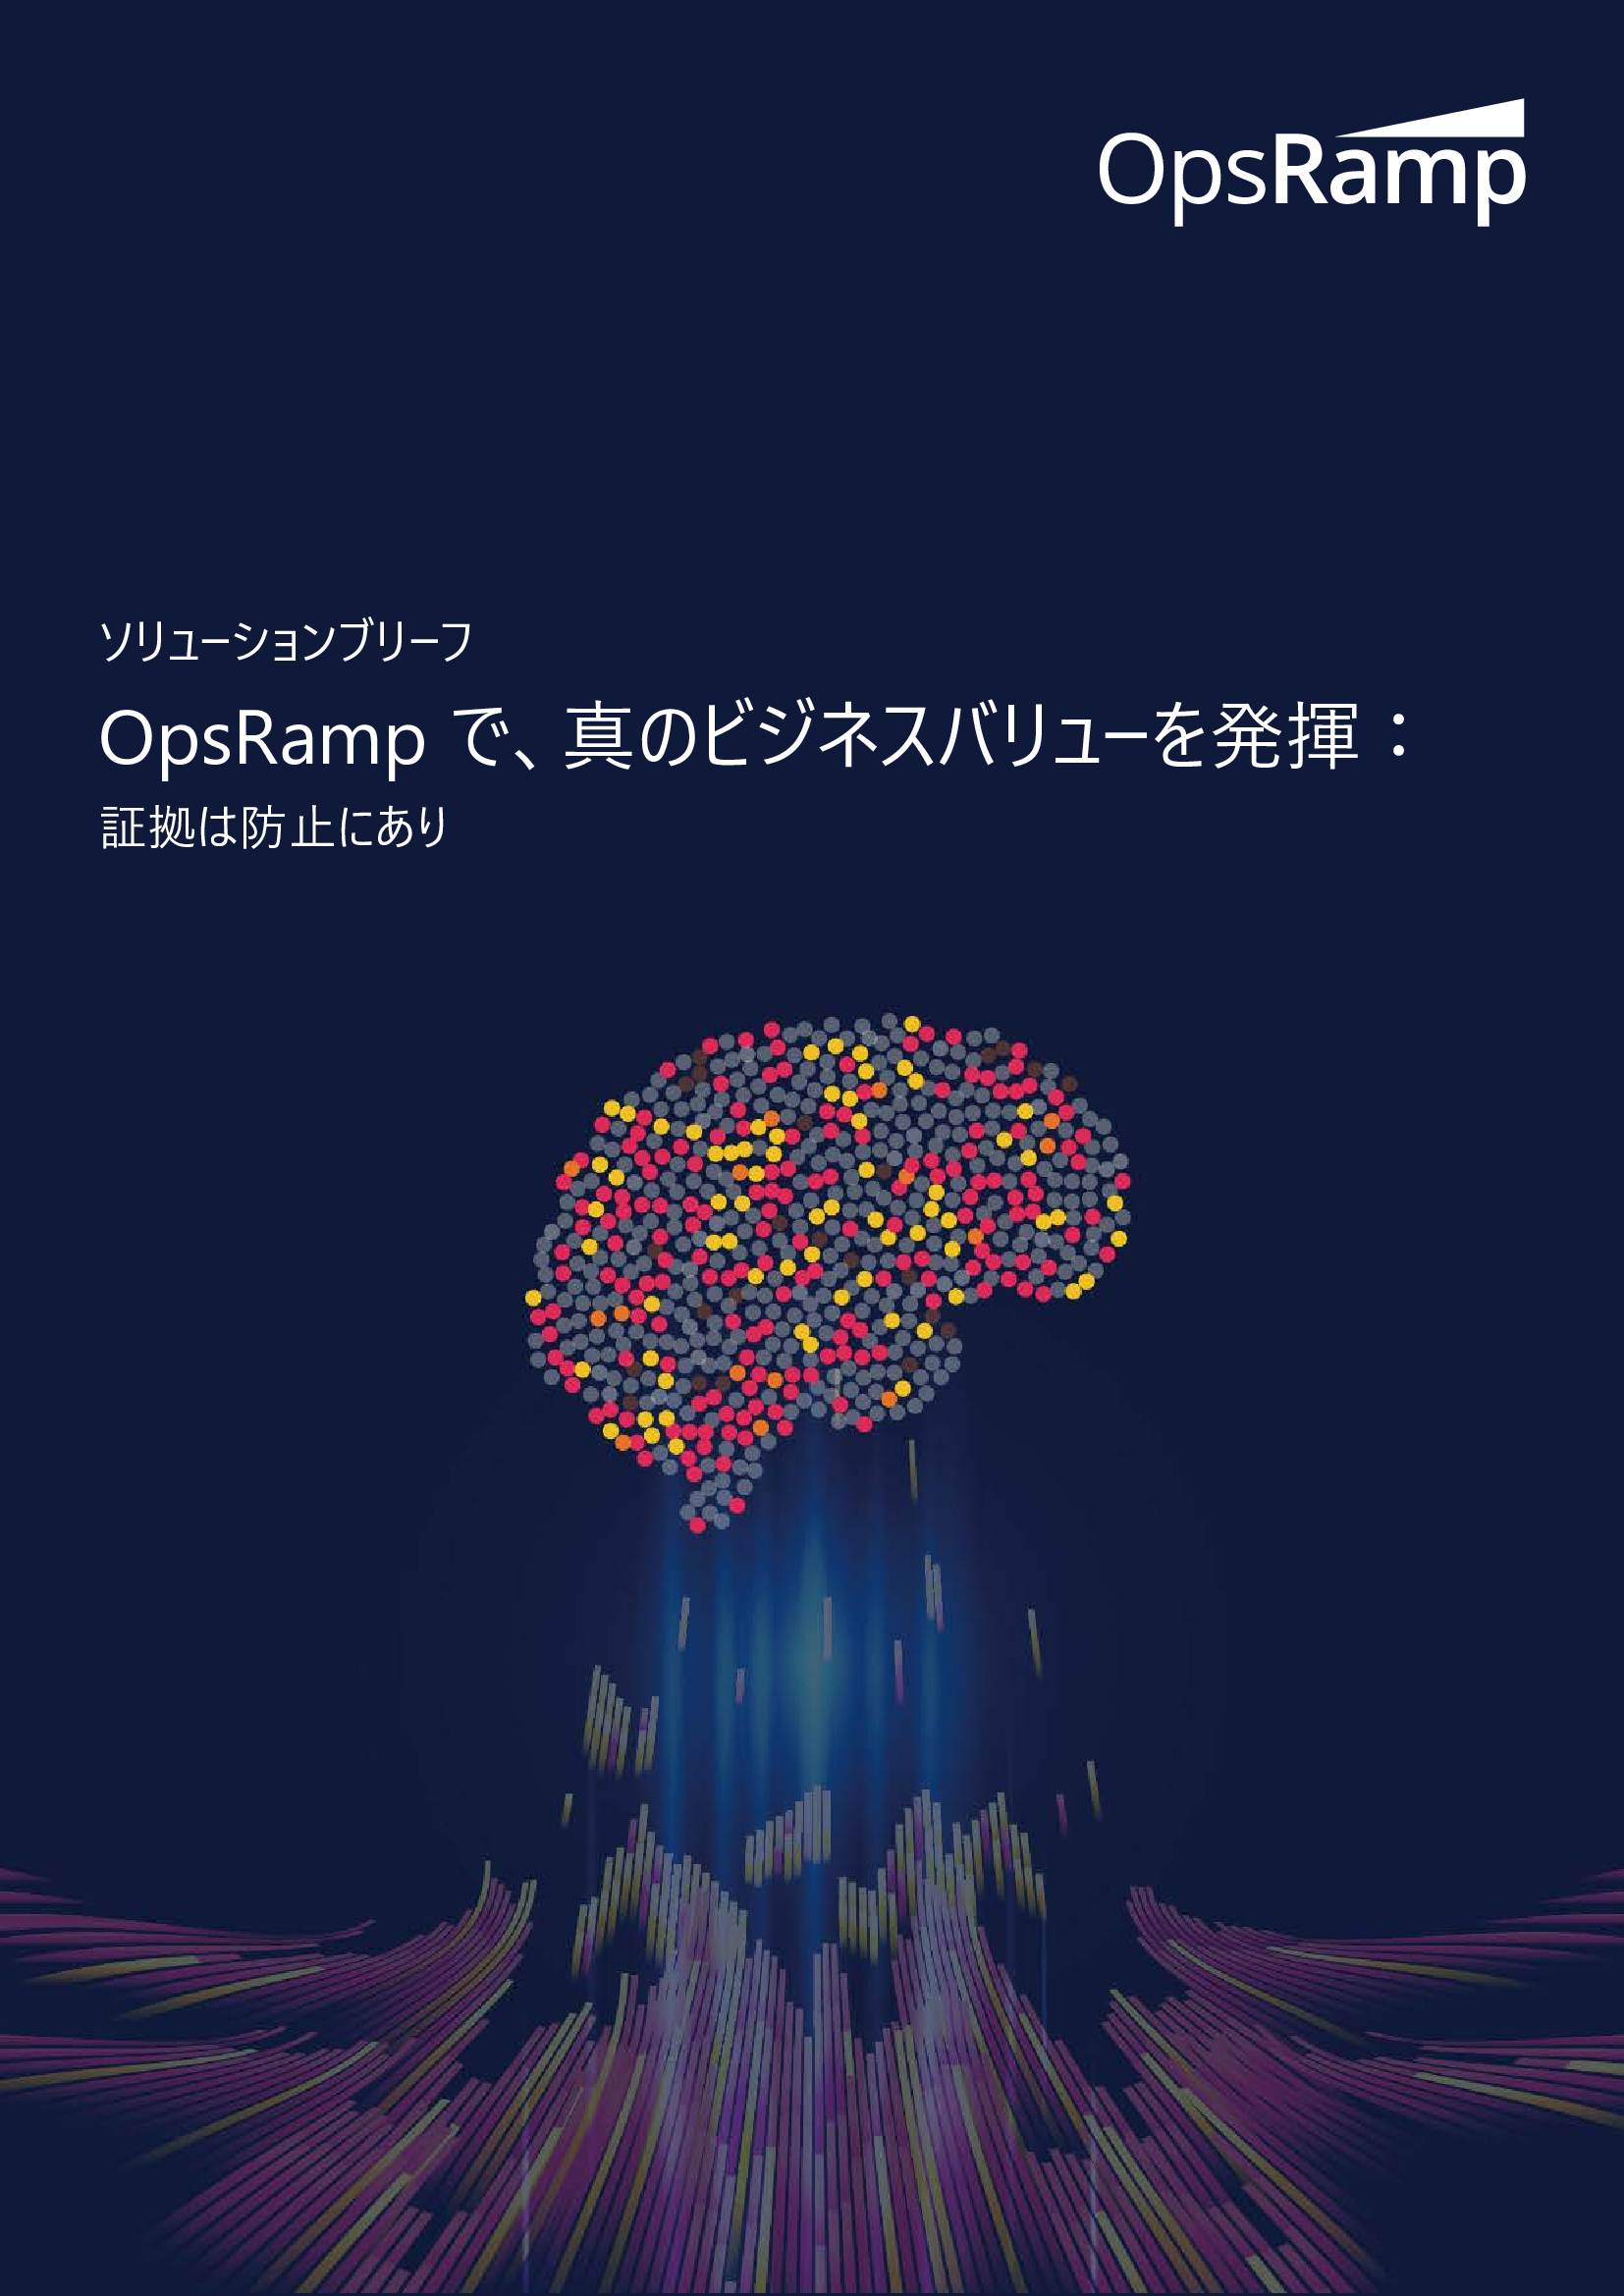 opsramp_aiops-roi_cover.jpg